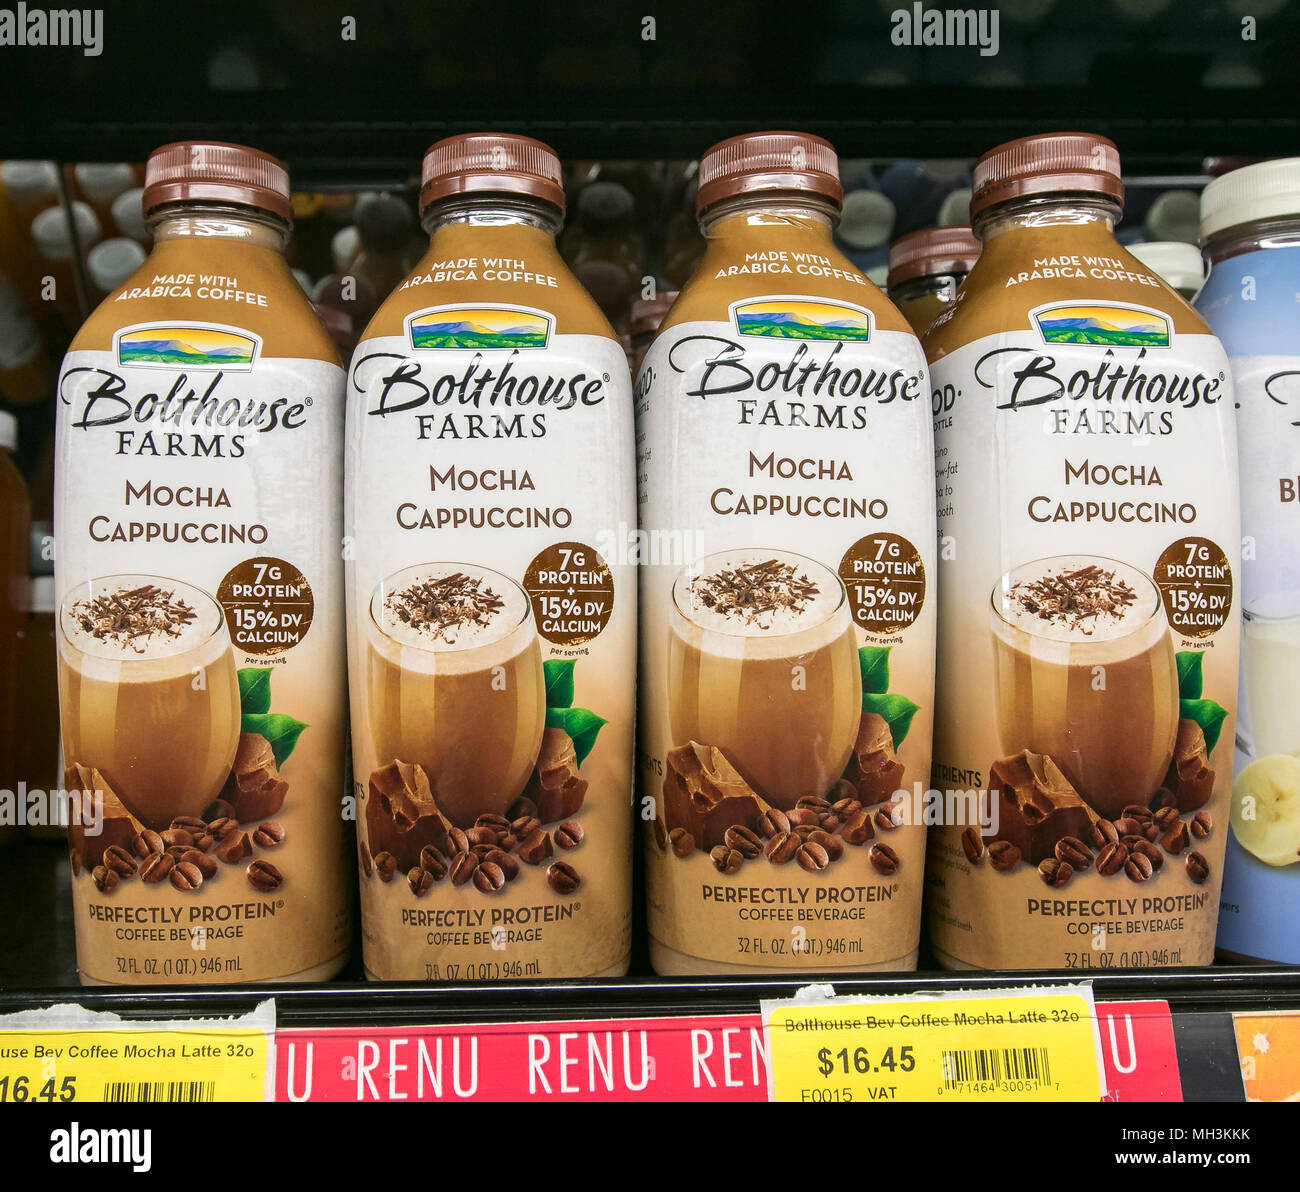 Holetown, Barbados, 03-19-2018: Mocha Cappuccino drinks stand on a shelf of a supermarket. Stock Photo